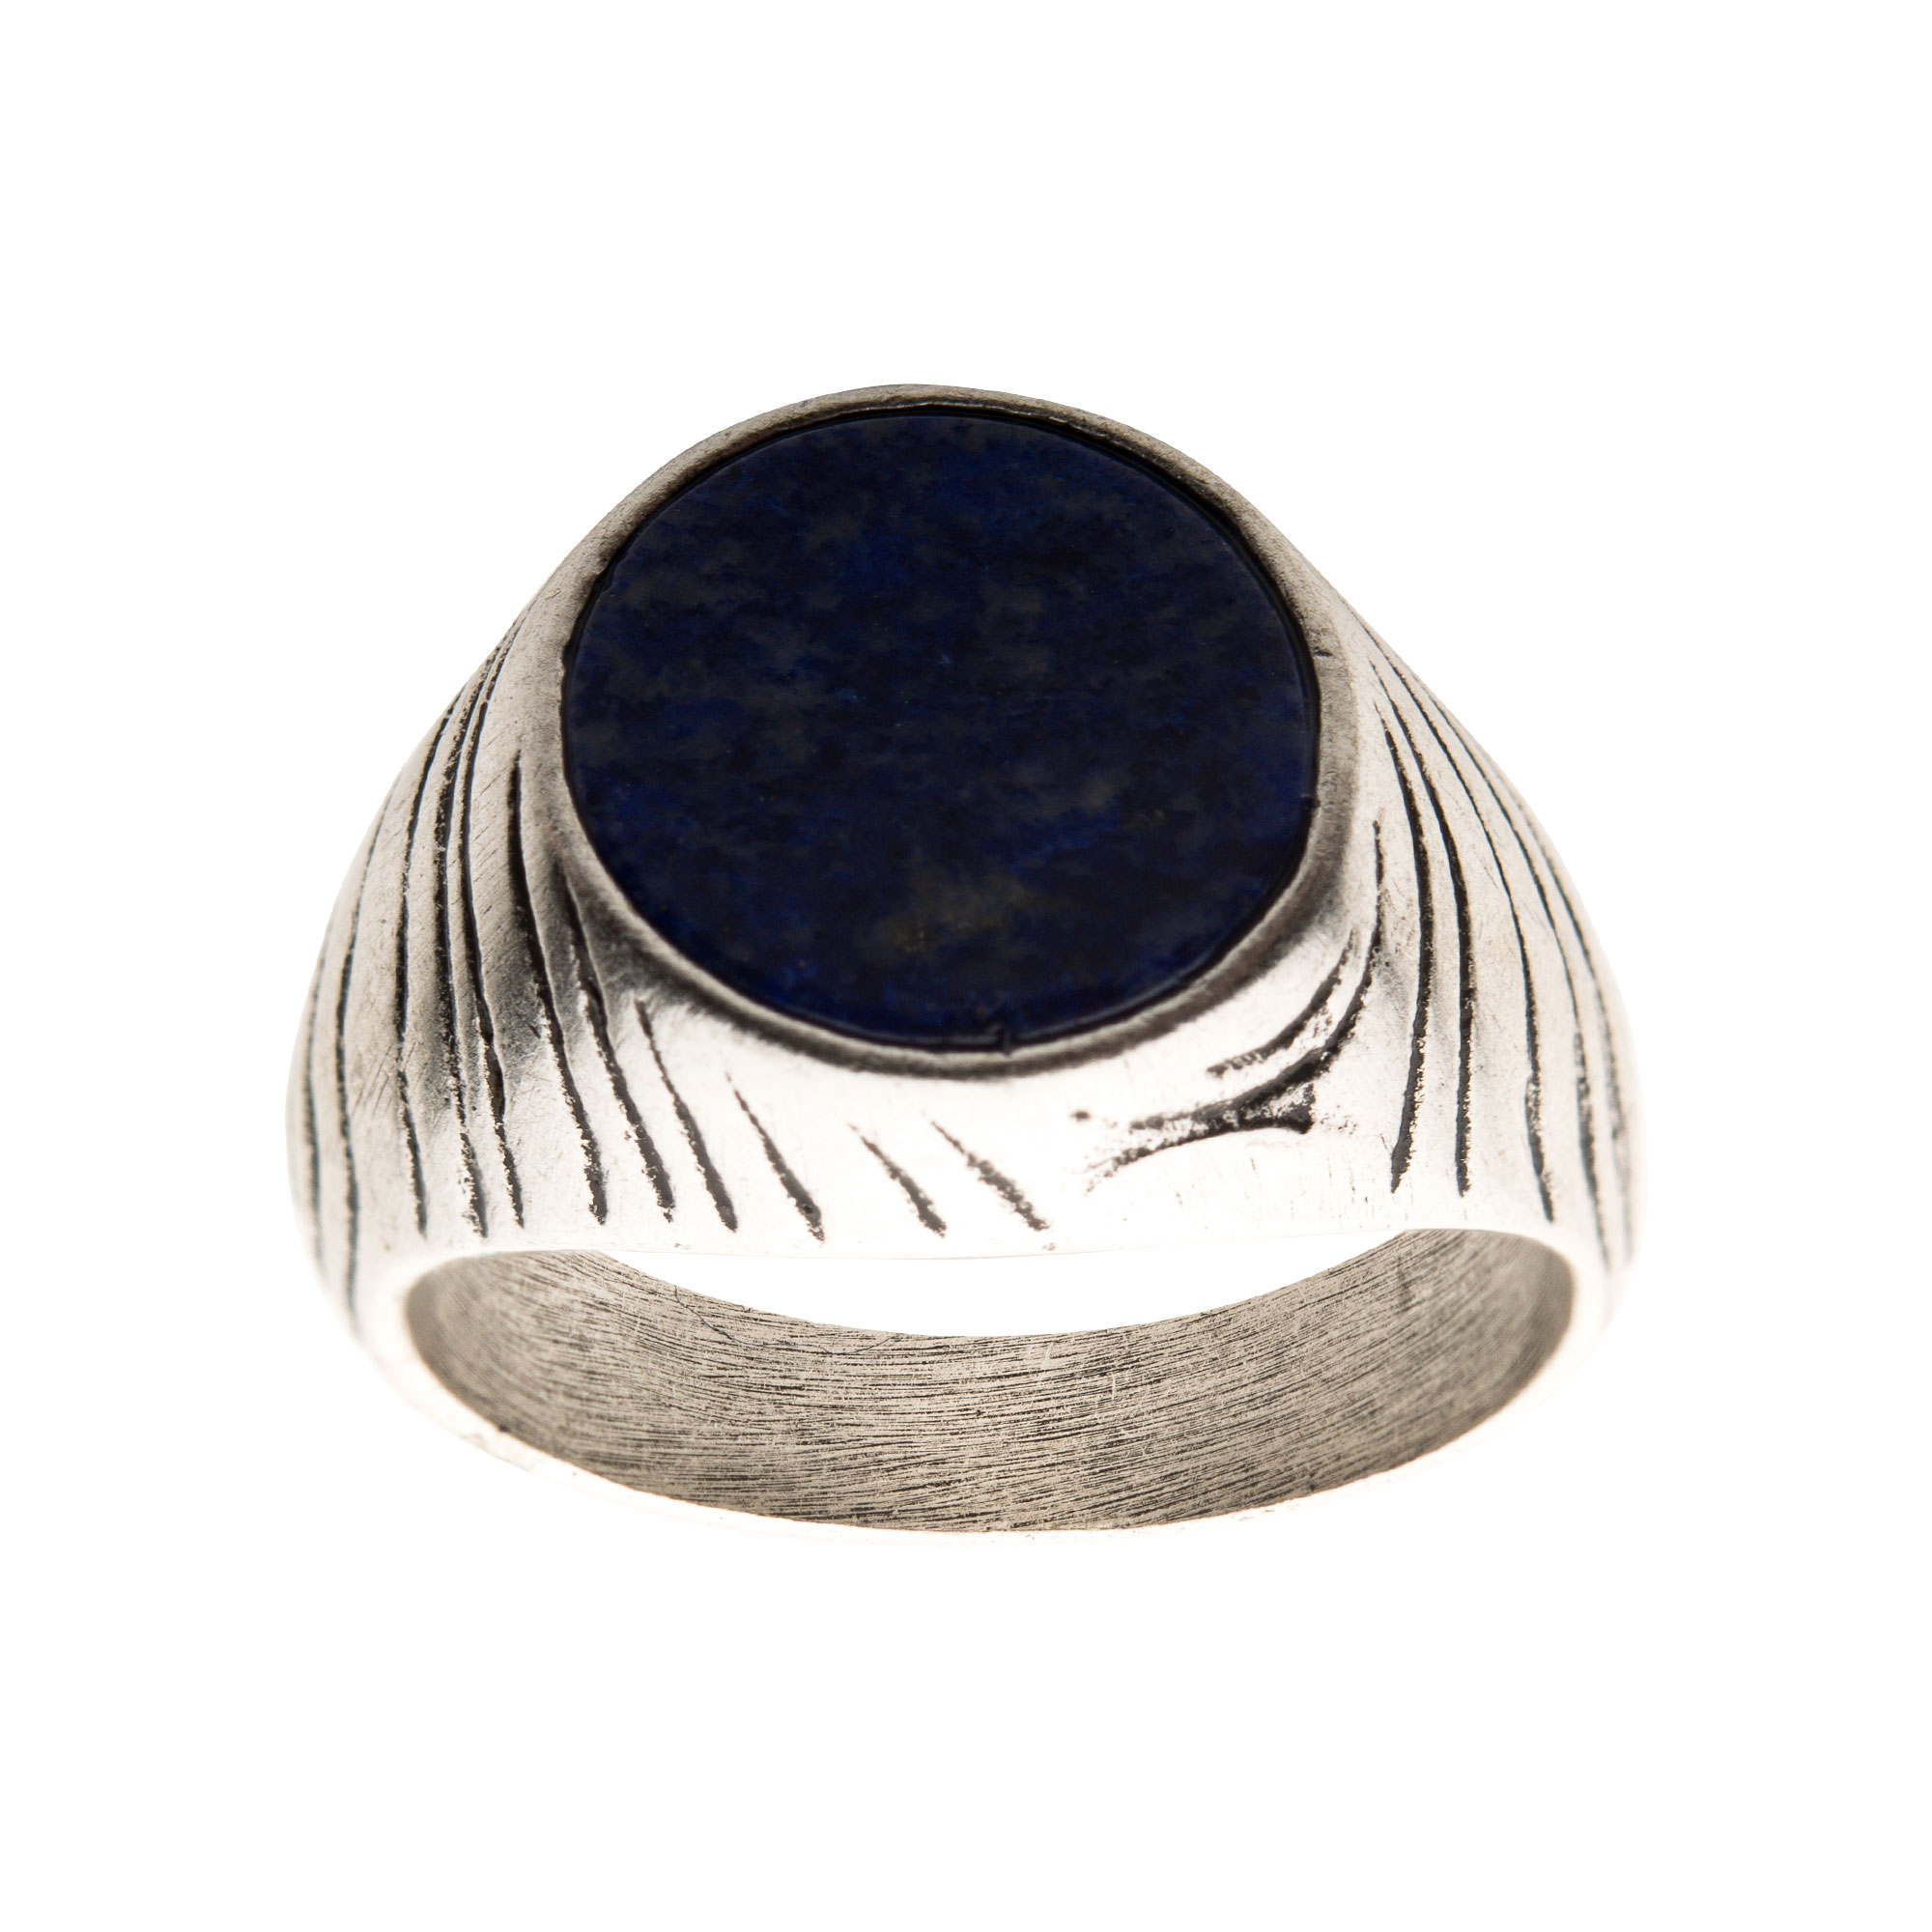 Stainless Steel Silver Plated with Lapis Stone Ring Image 2 Enchanted Jewelry Plainfield, CT